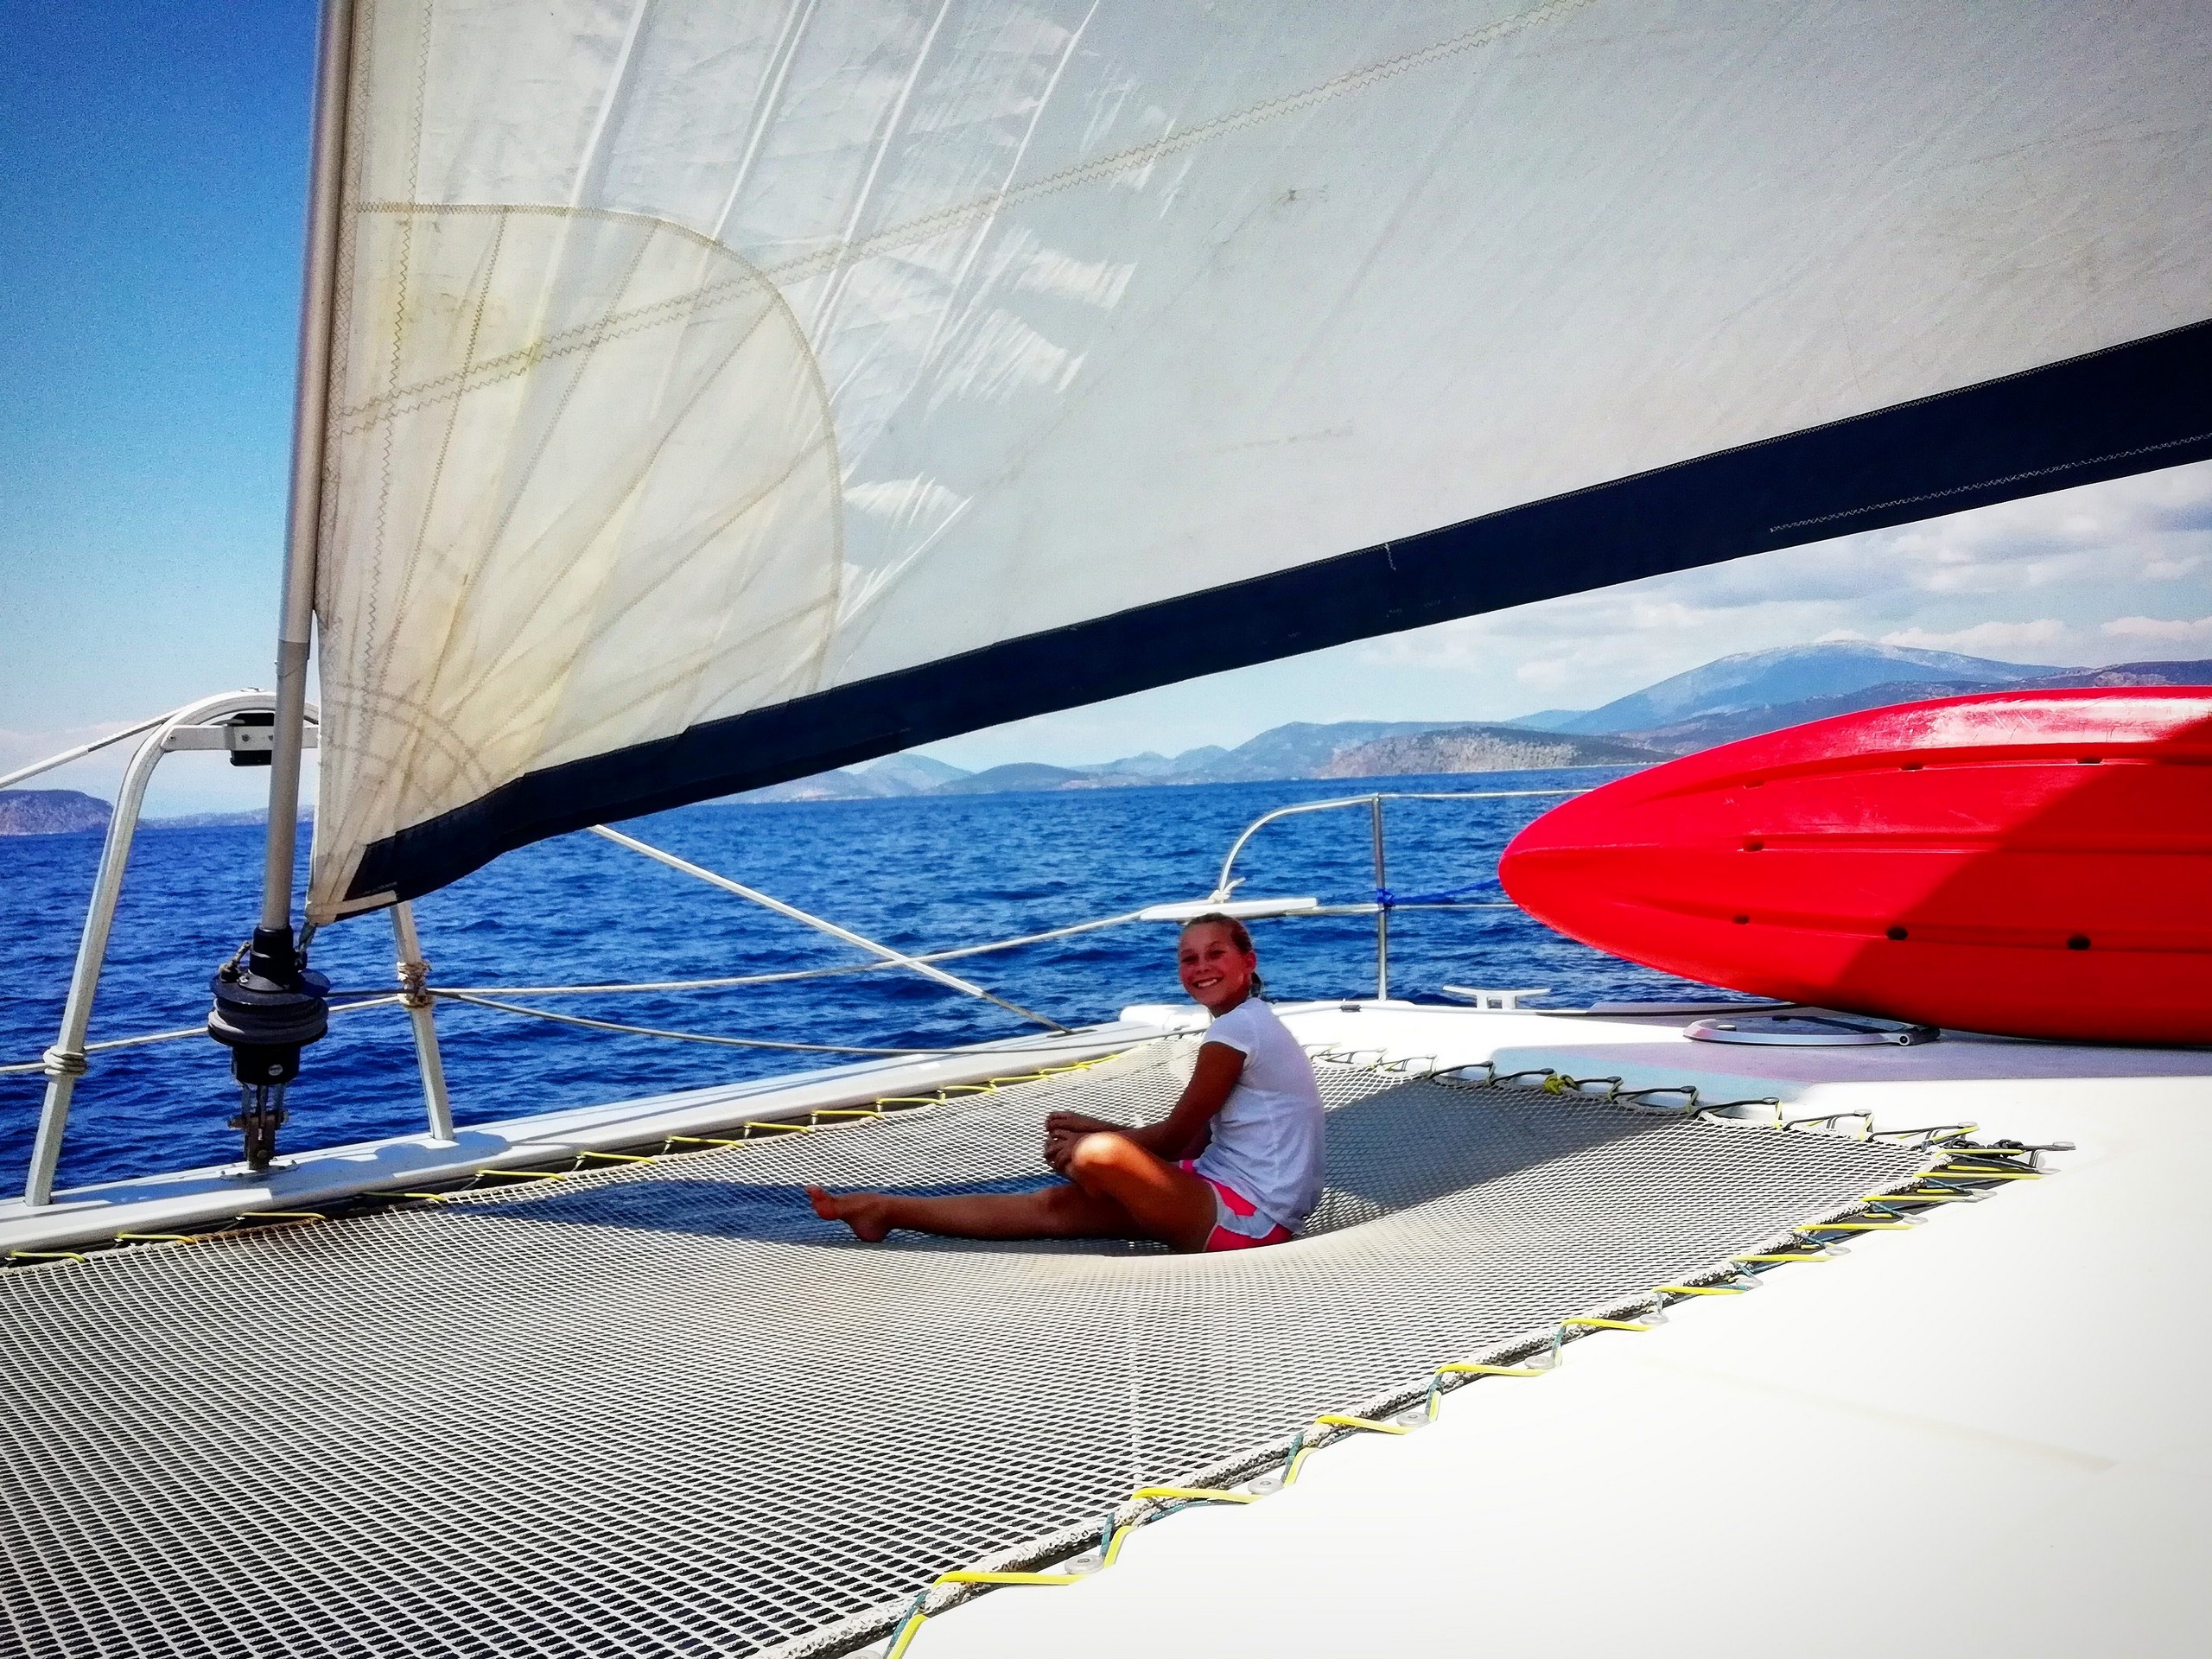 Sun tanning on the deck of the sailboat